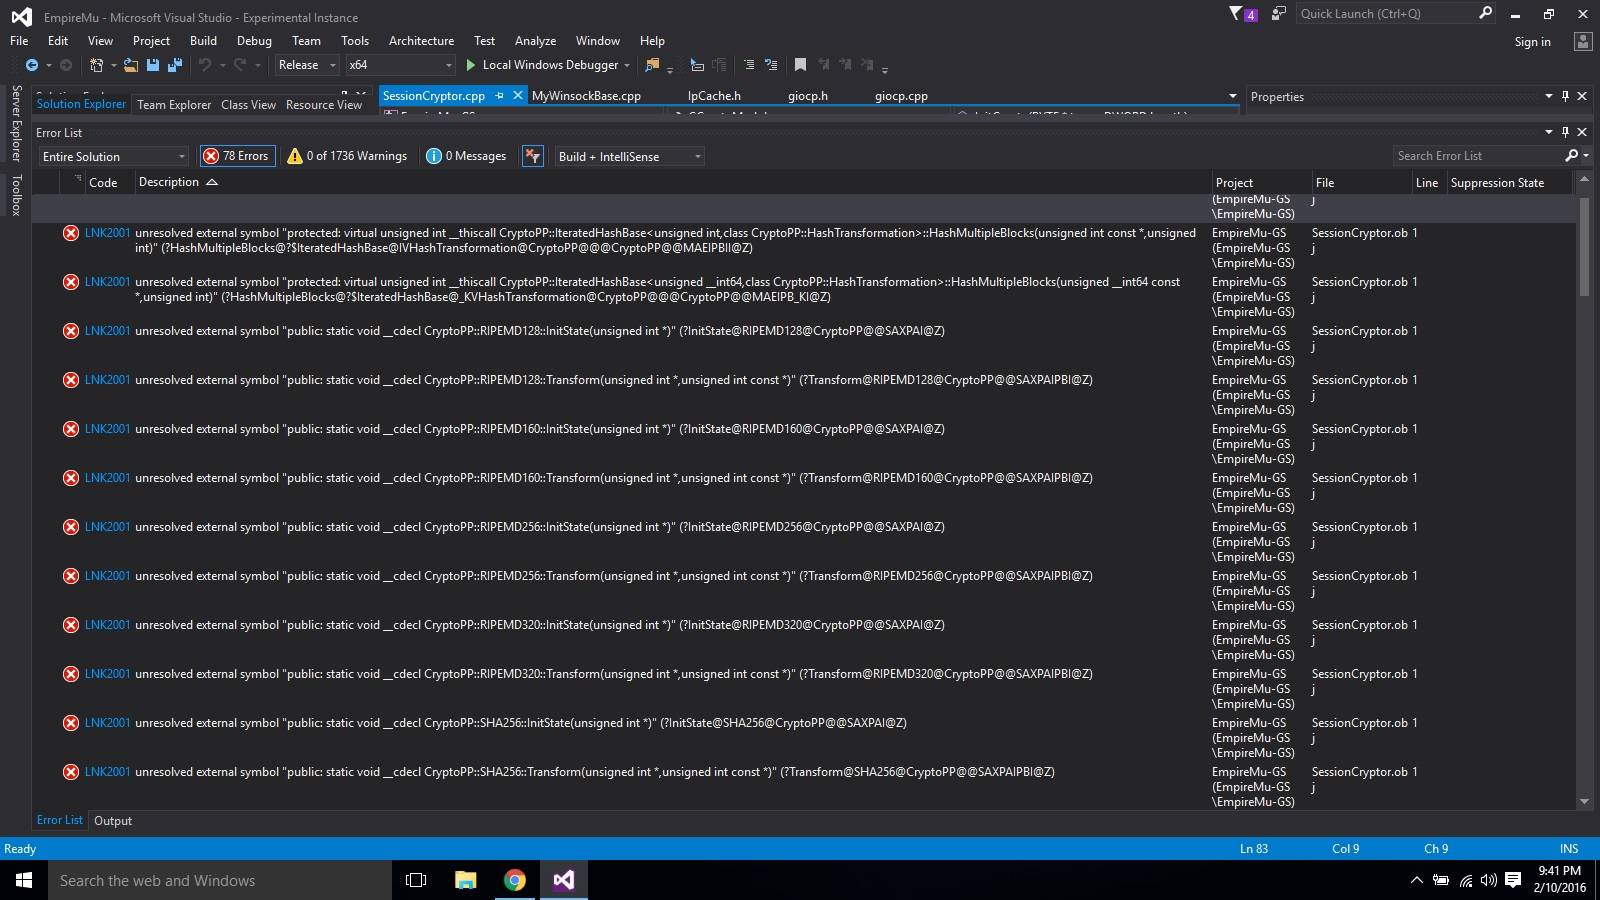 GyfFbUM - How to make OpenMu S9 server and client with VS2015,SQL2014 on W10 - RaGEZONE Forums